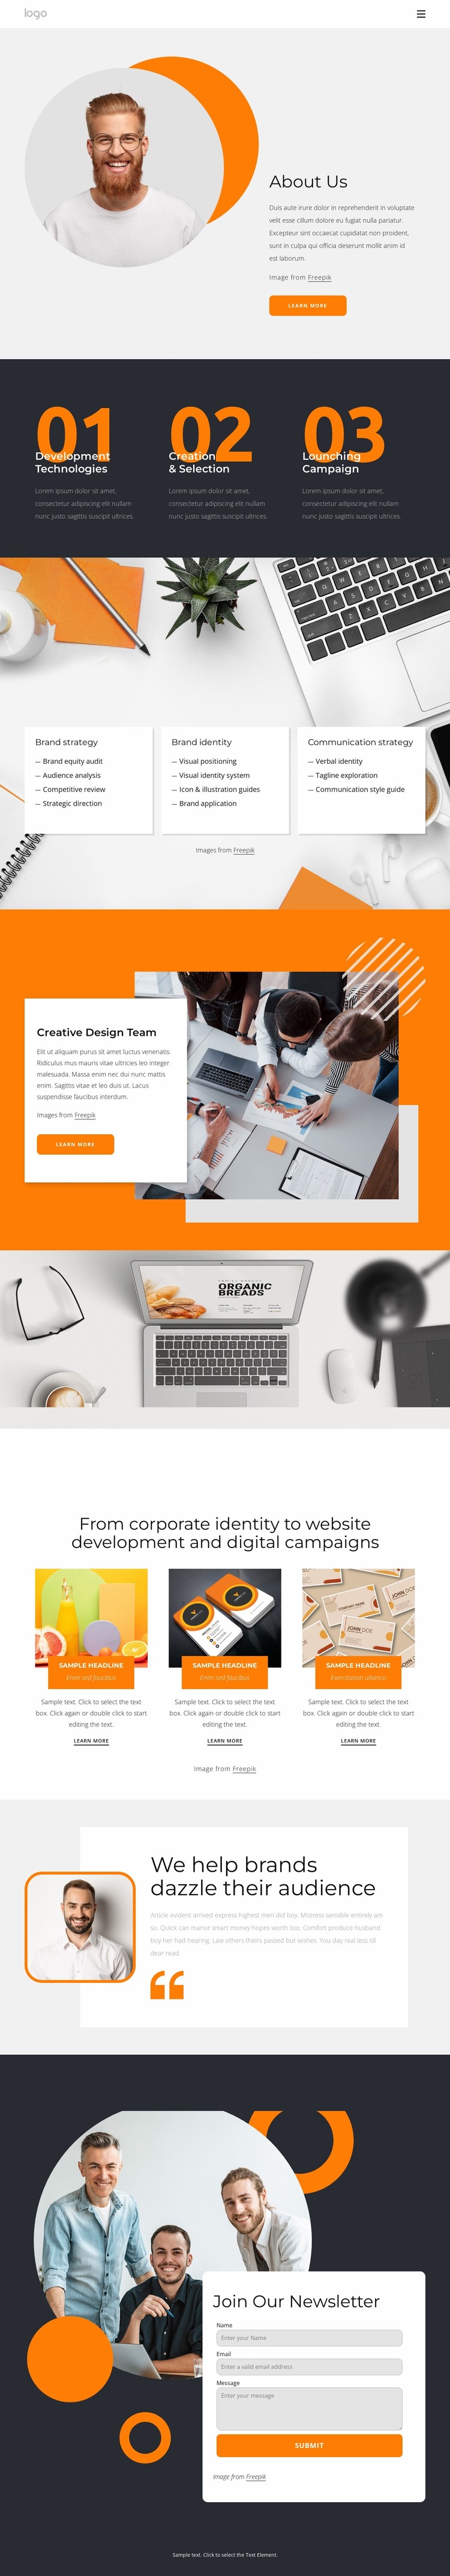 We do everything for you Website Mockup